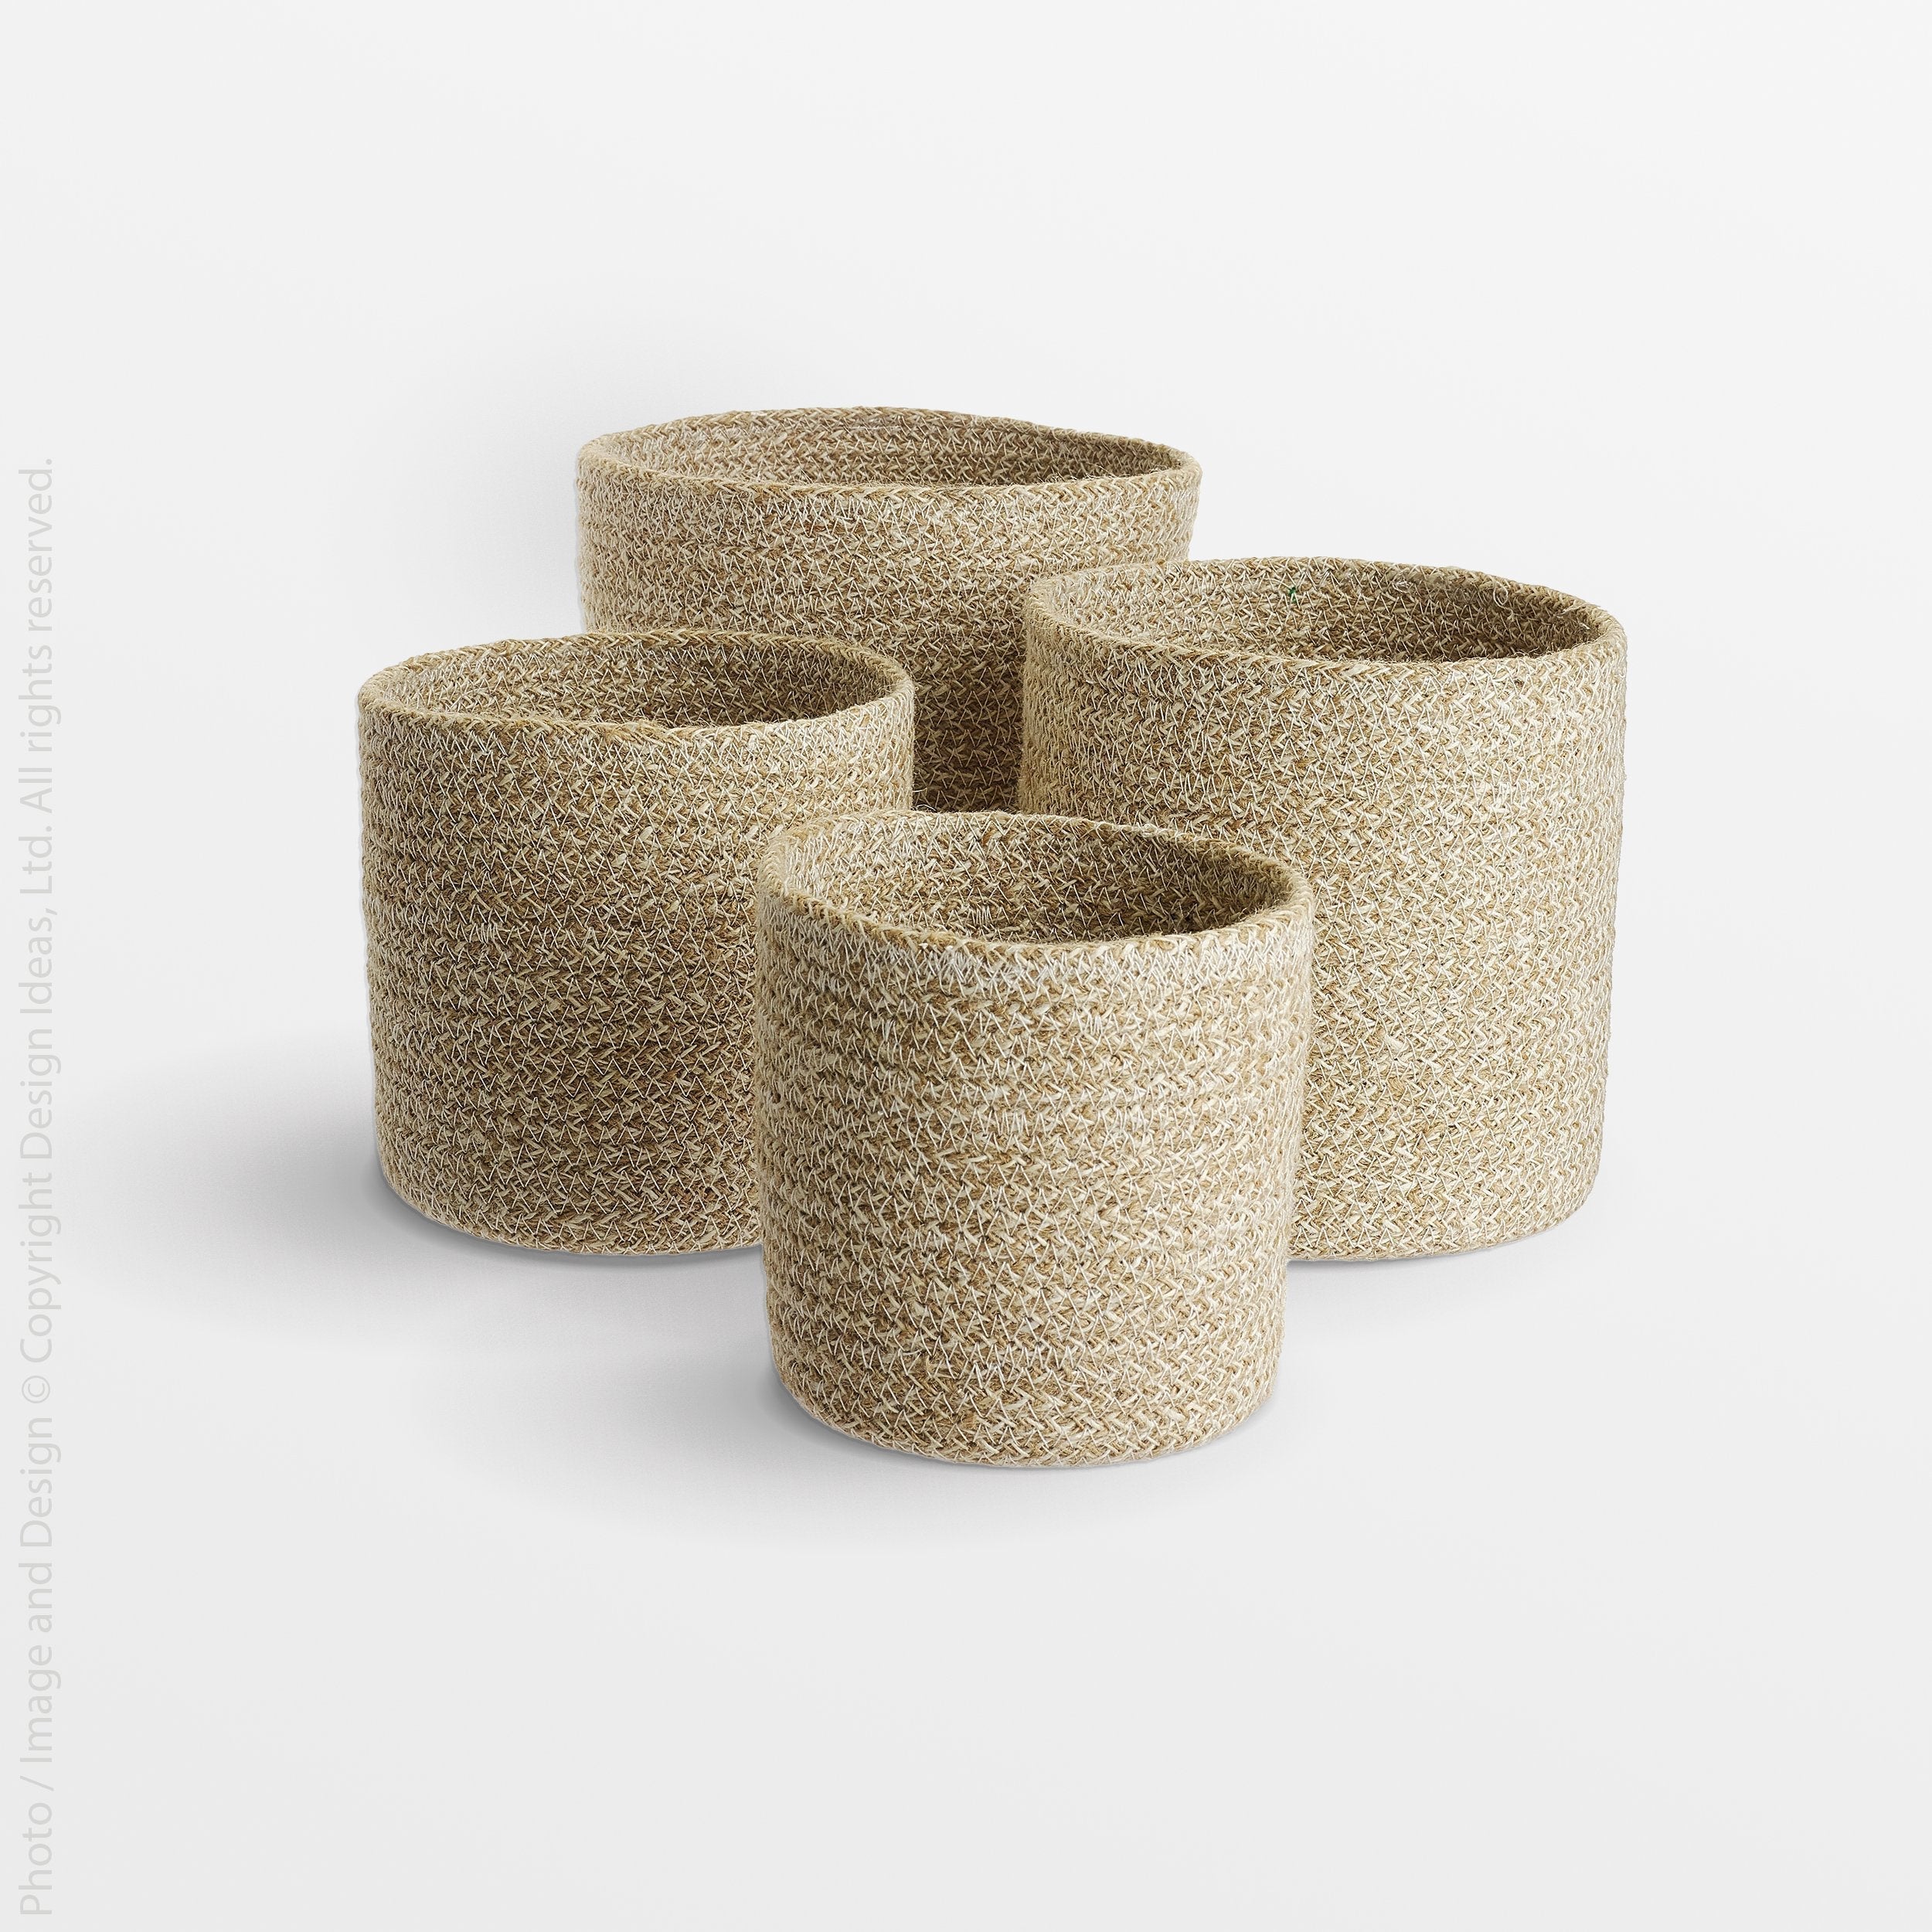 Melia™ baskets (set of 4) - Black | Image 1 | Premium Basket from the Melia collection | made with Jute for long lasting use | texxture